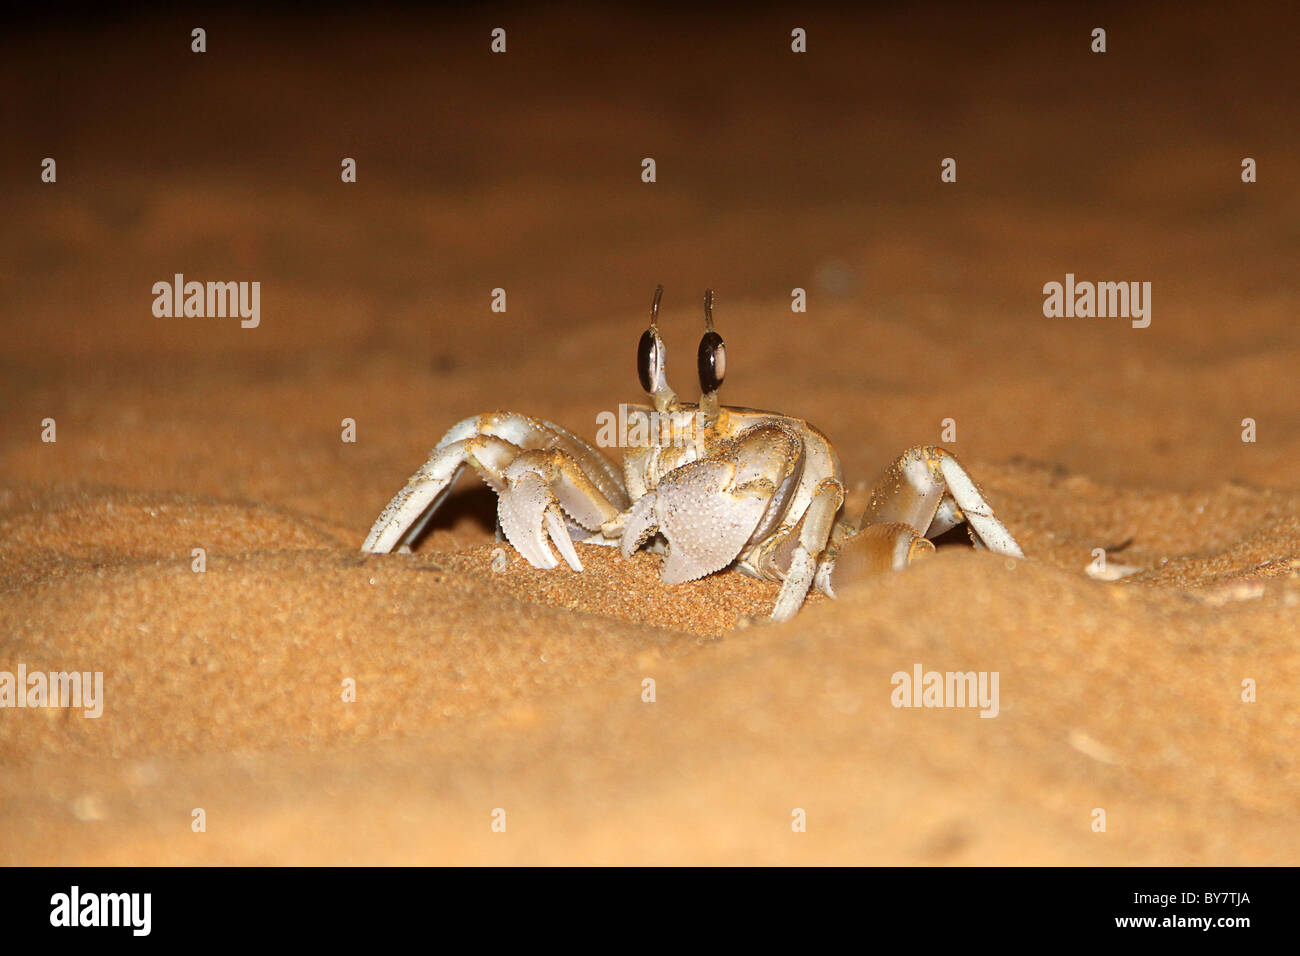 Sea crab masked in sand. Sea crab close up Stock Photo